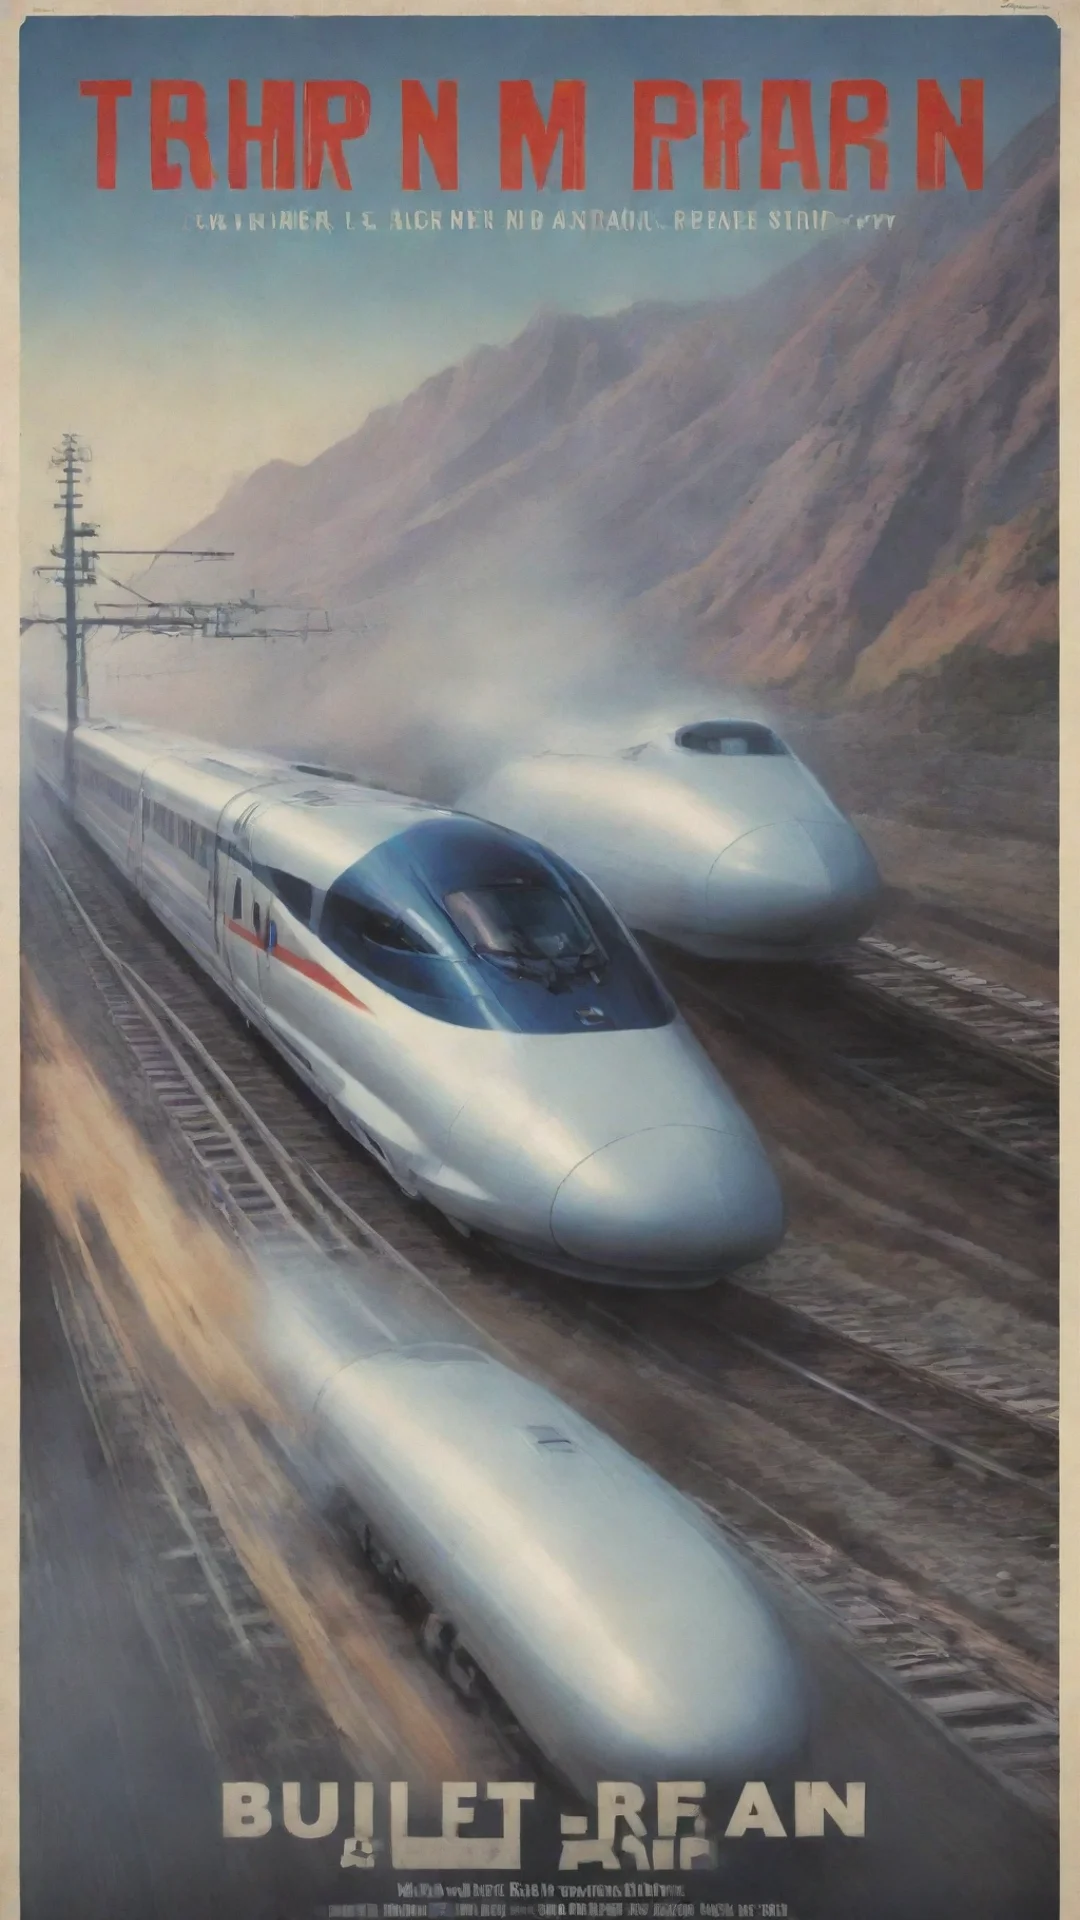 aiamazing brian miller styled bullet train movie poster  awesome portrait 2 tall